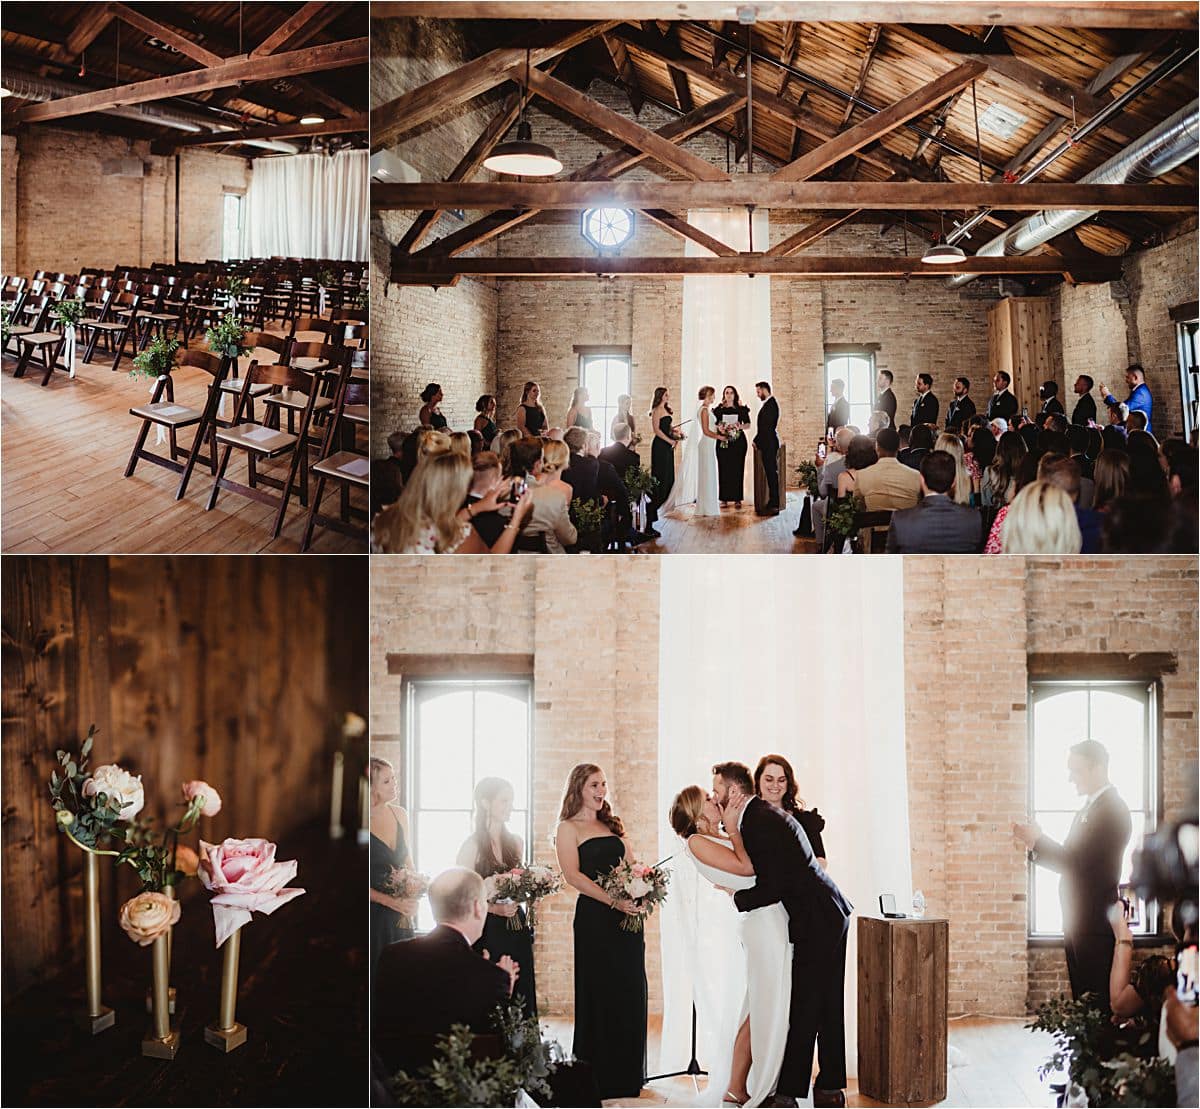 Rustic June Wedding at The Lageret Stoughton, WI